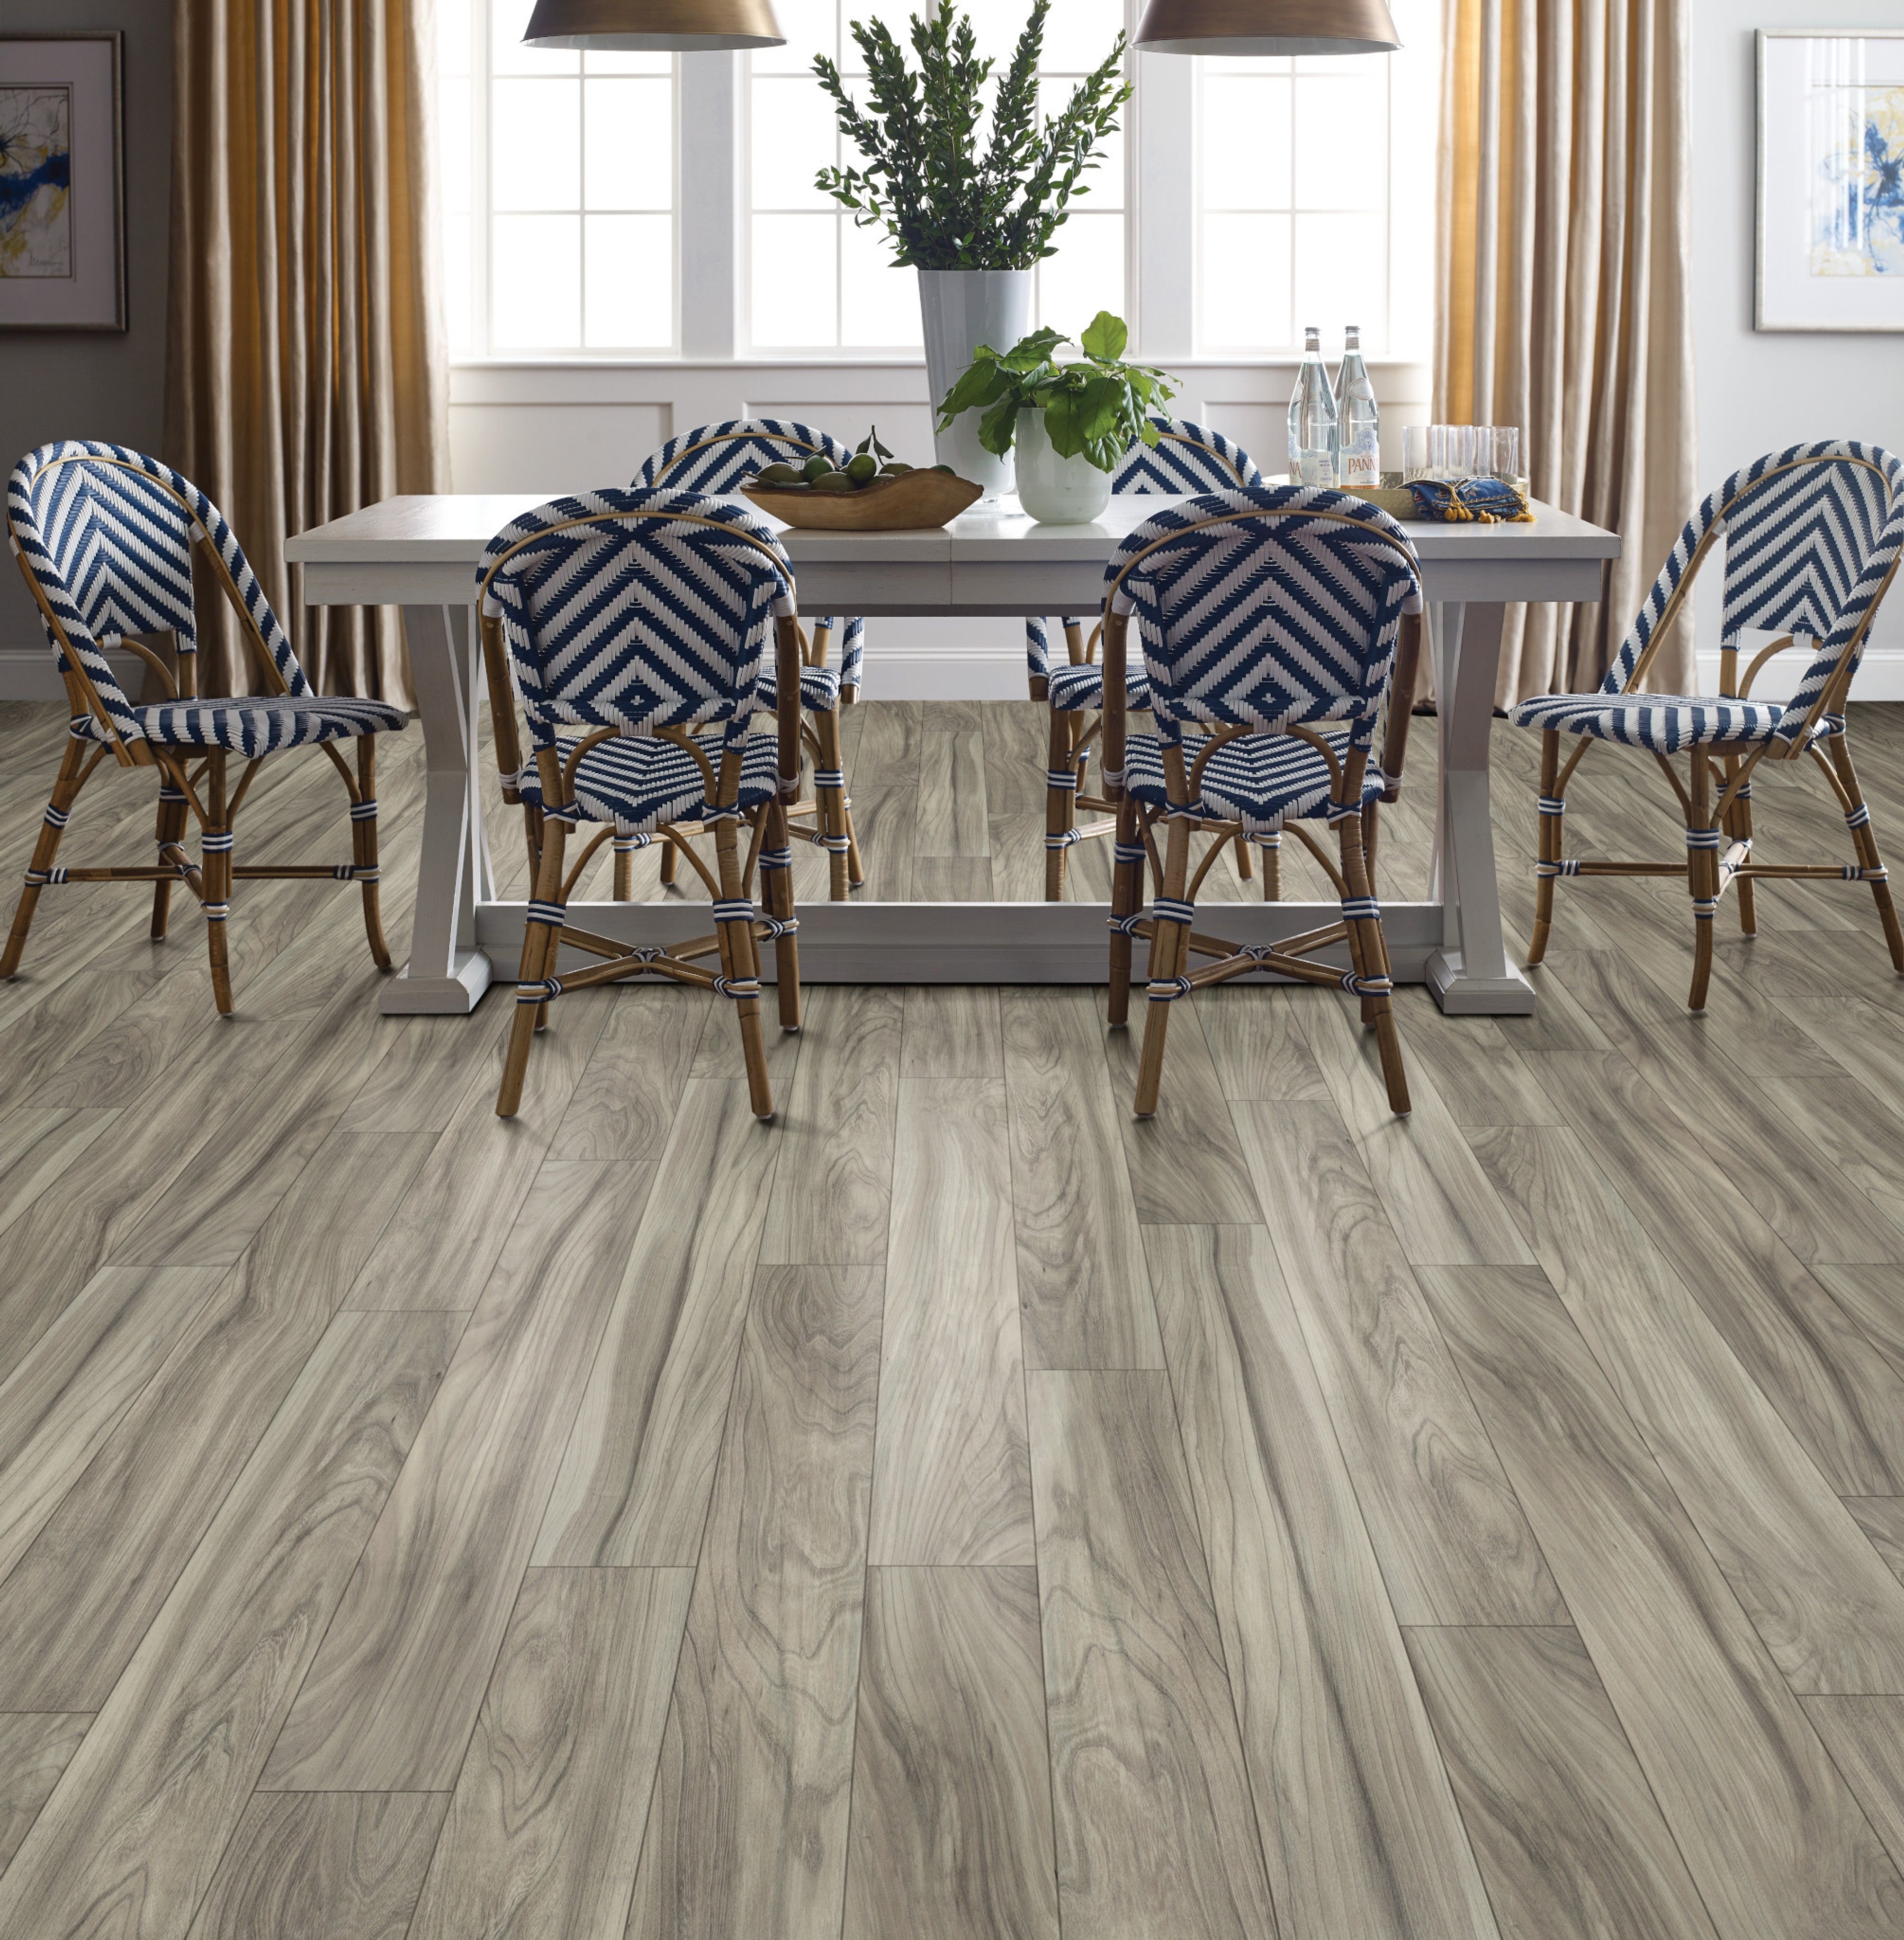 Dining room with wood-look laminate flooring from Wholesale Flooring and Blinds in Casper, WY